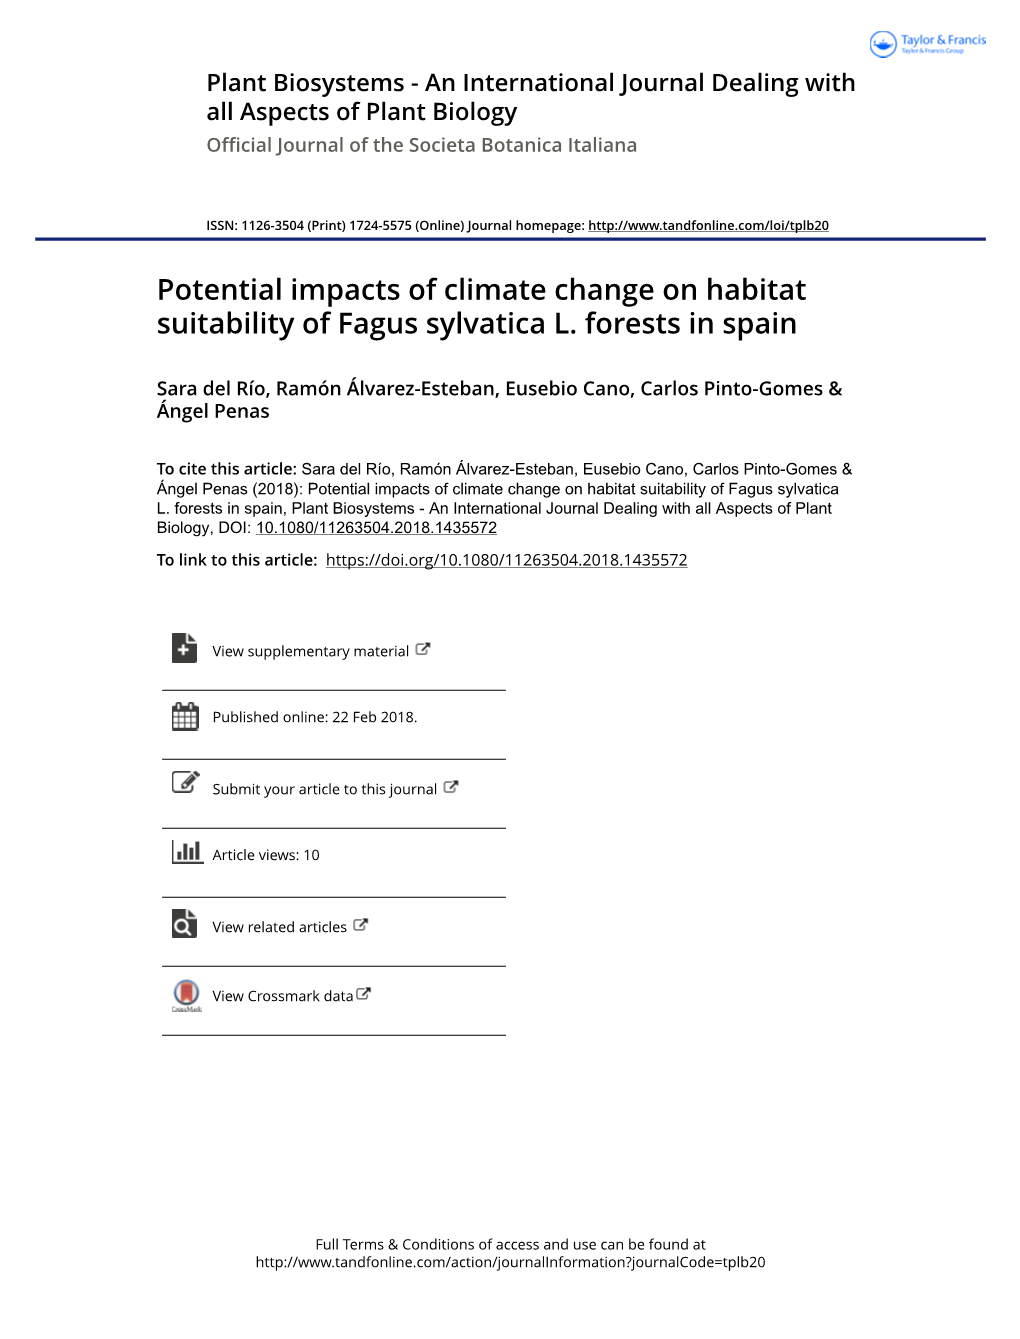 Potential Impacts of Climate Change on Habitat Suitability of Fagus Sylvatica L. Forests in Spain